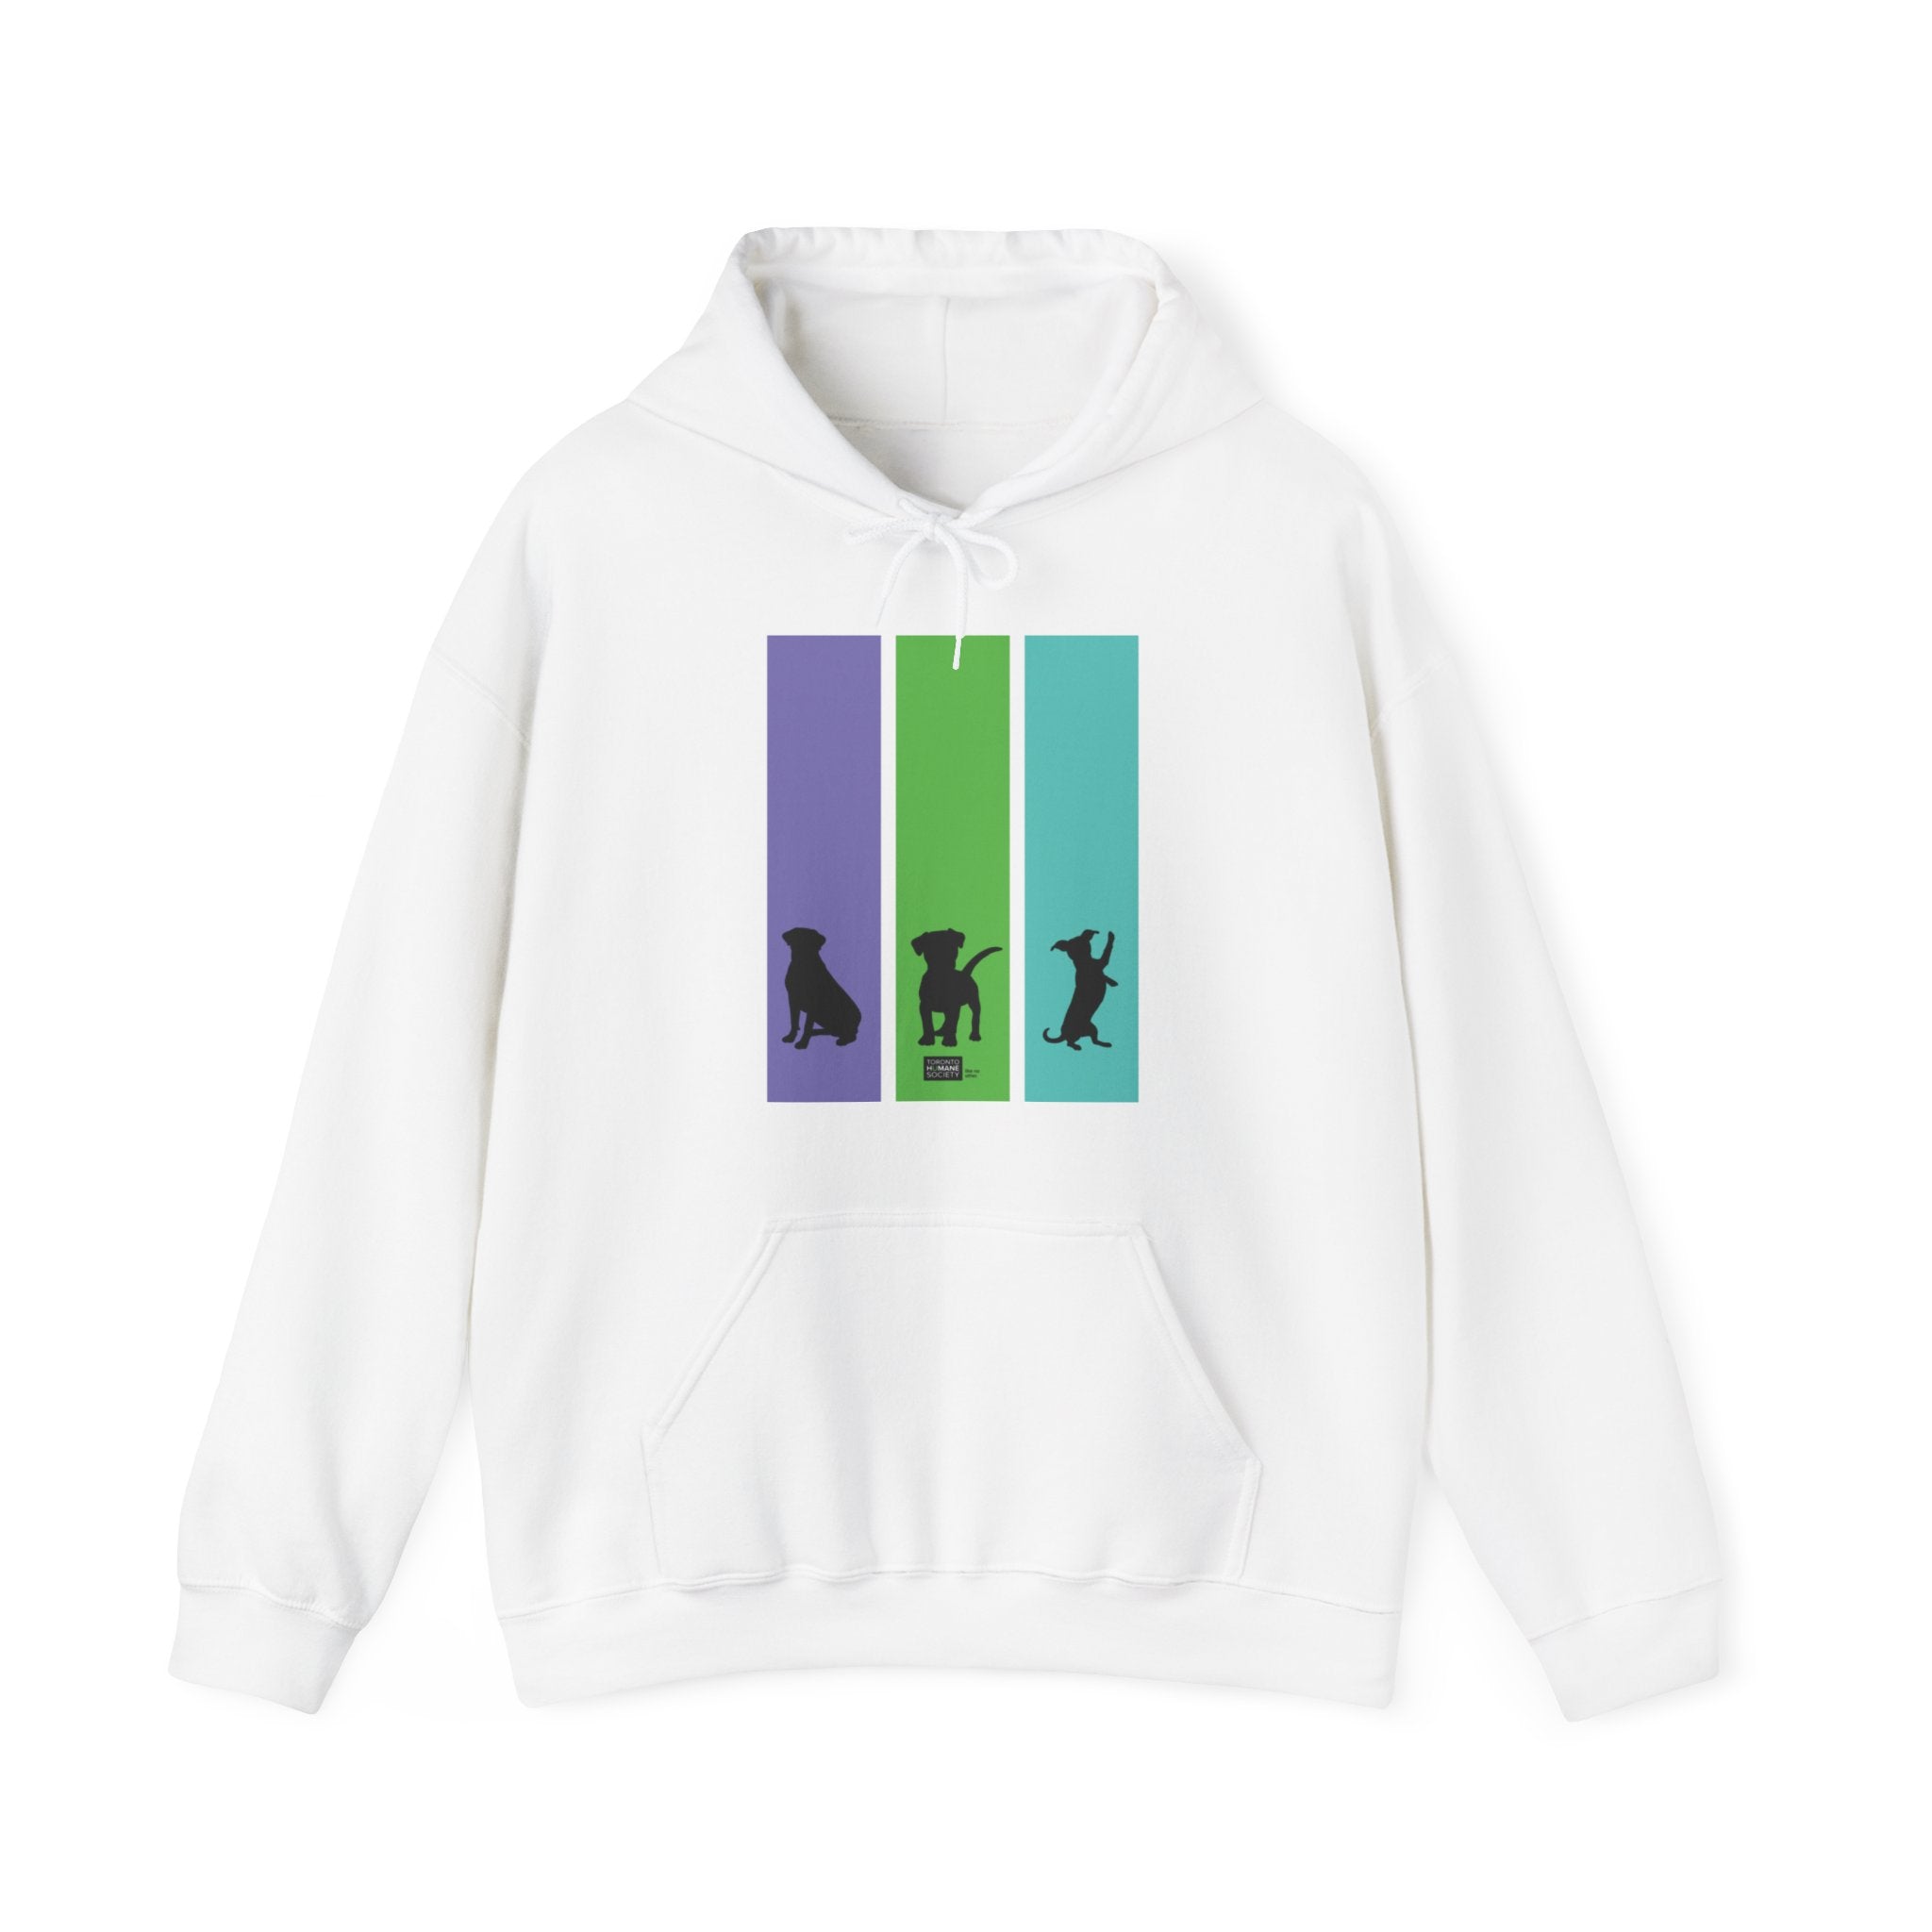 Unisex Heavy Blend Hoodie - Dog Silhouettes